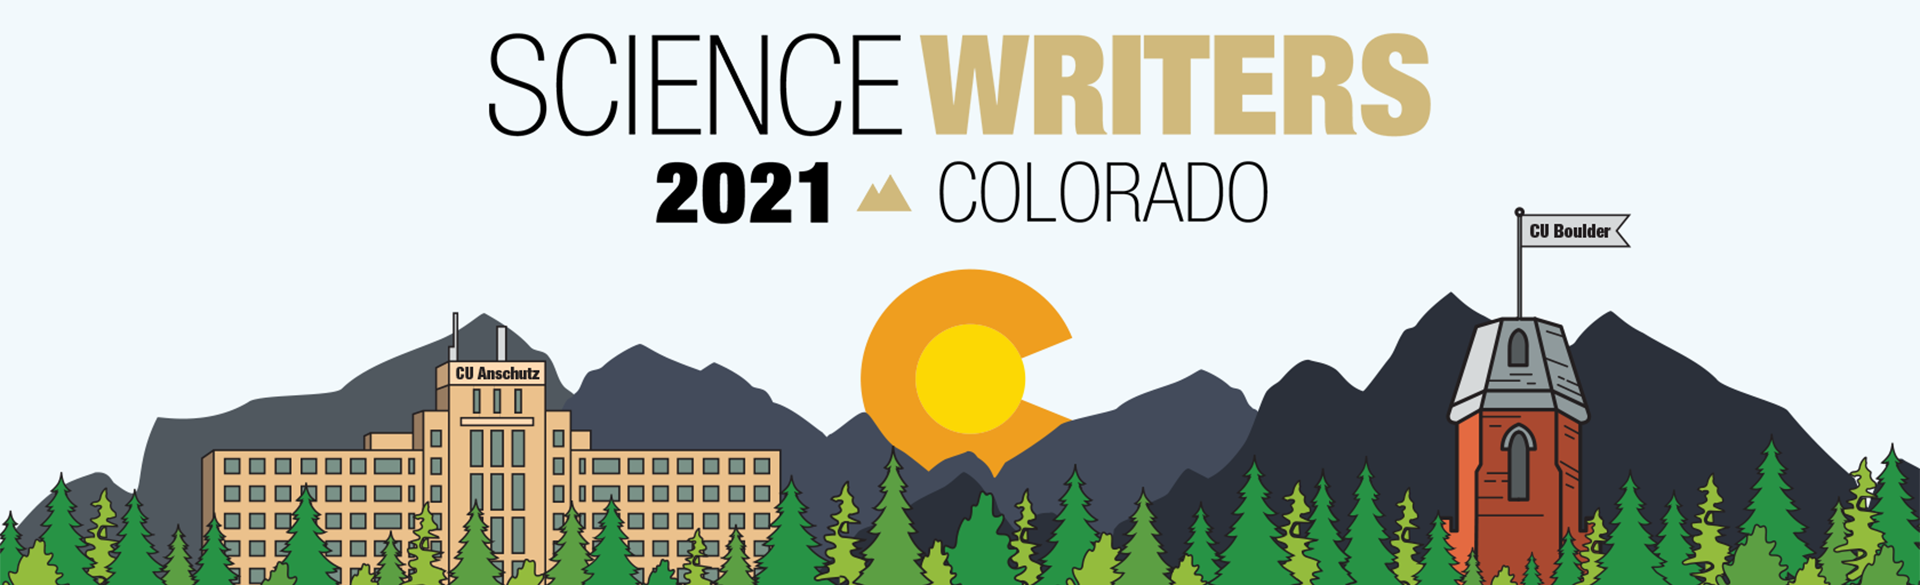 Nation’s Top Science Writers’ Conference Pushed to Fall 2021